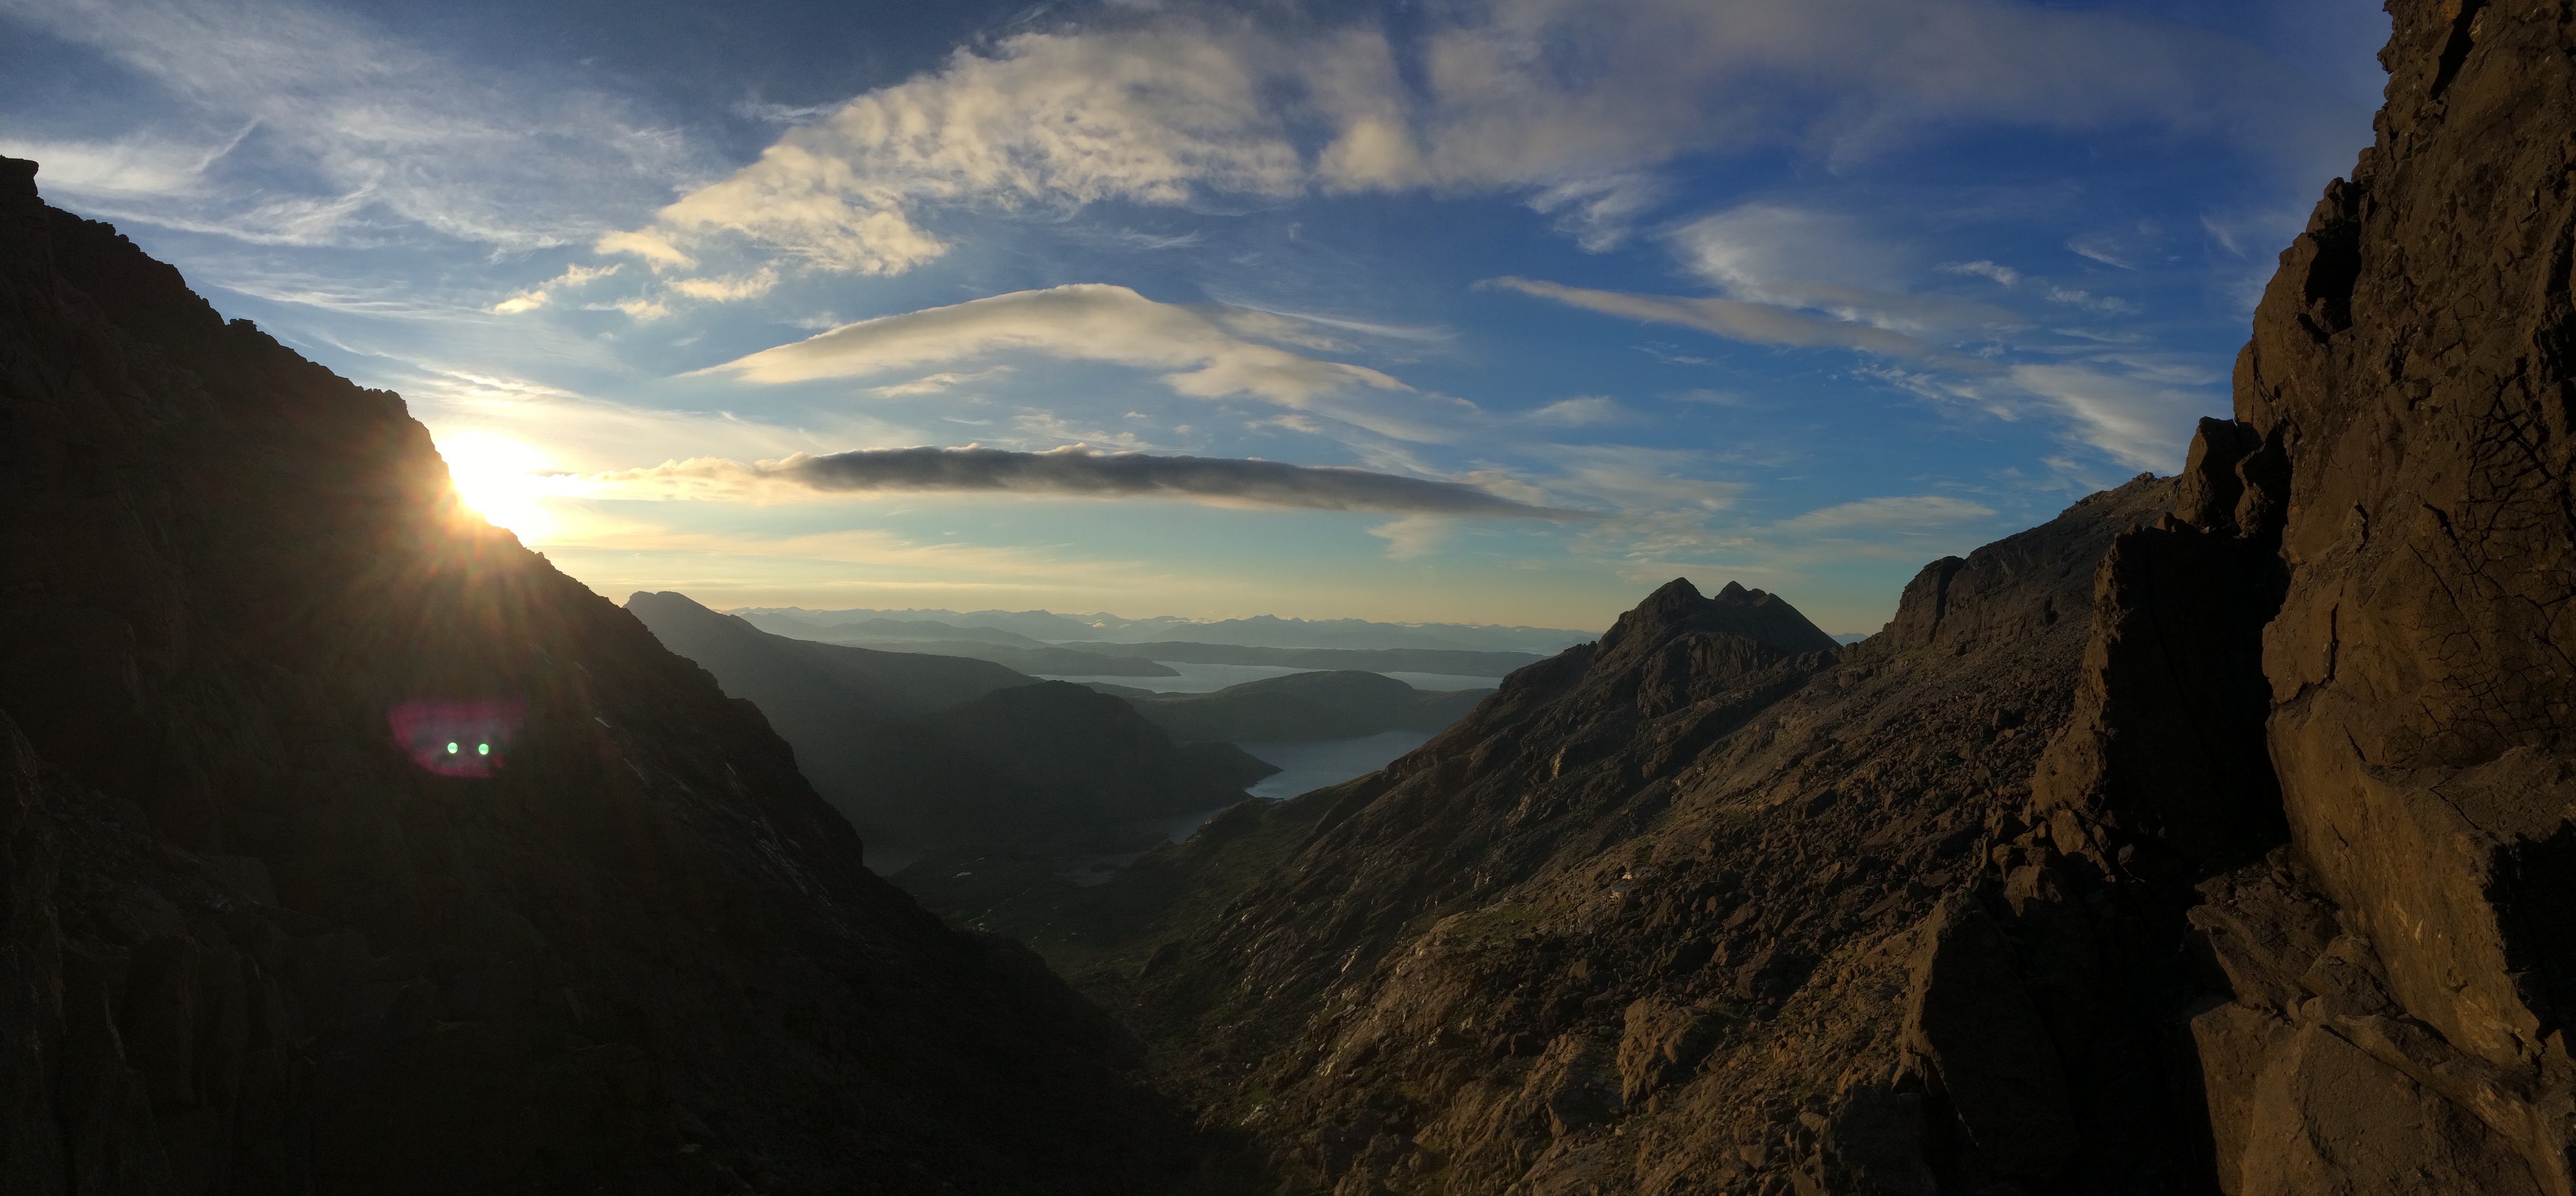 Foolin’ in the Cuillin – August 2016